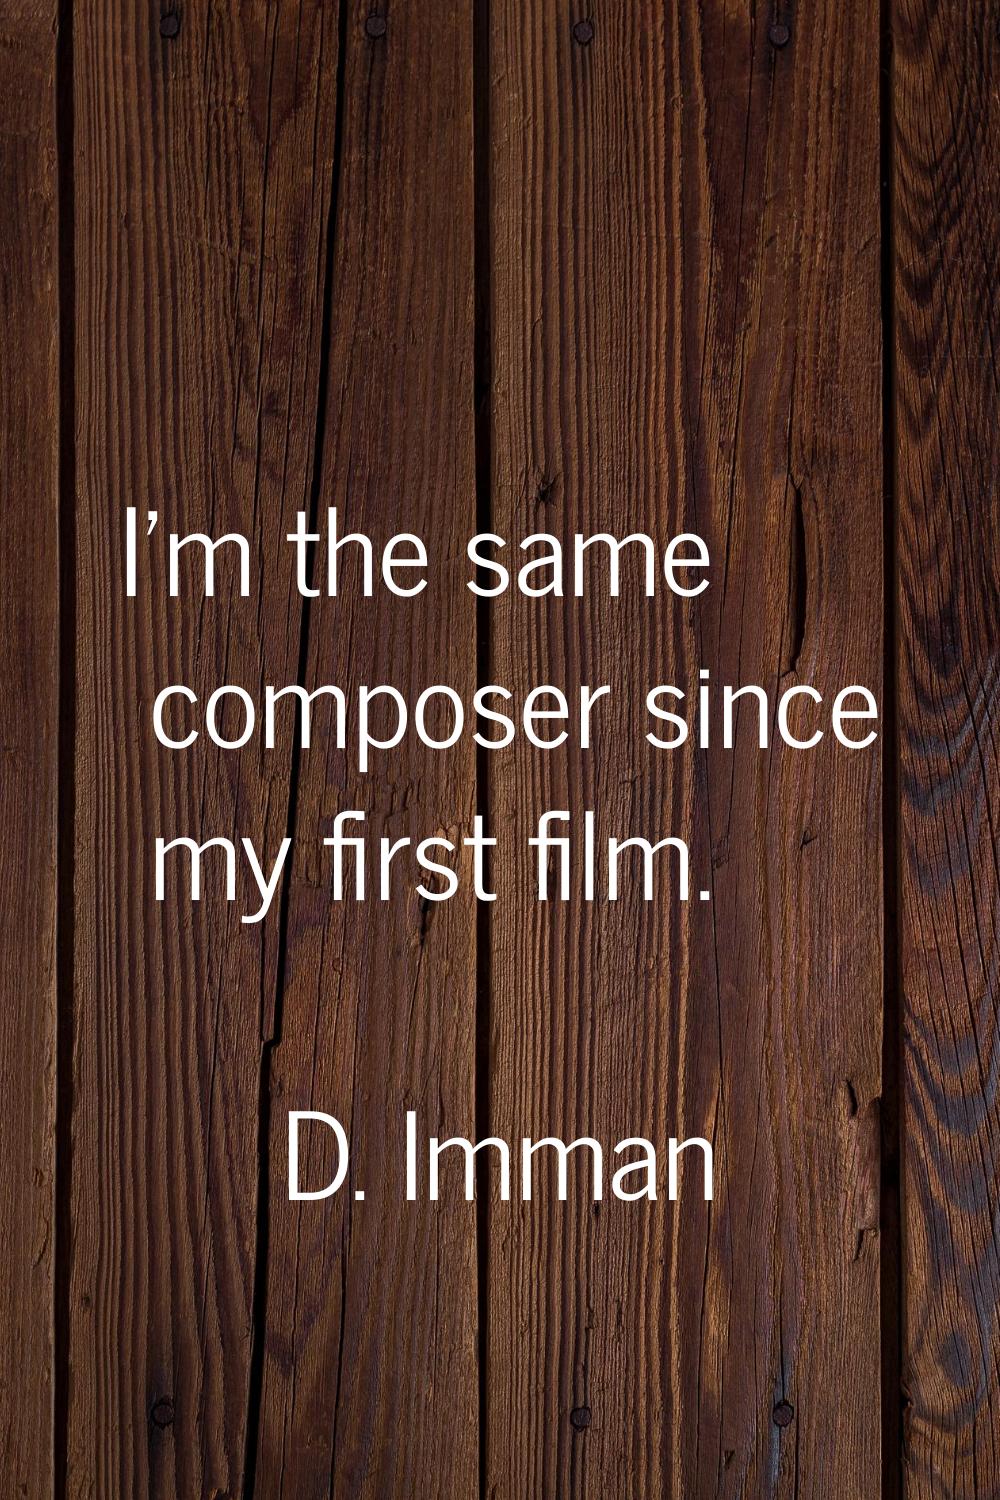 I'm the same composer since my first film.